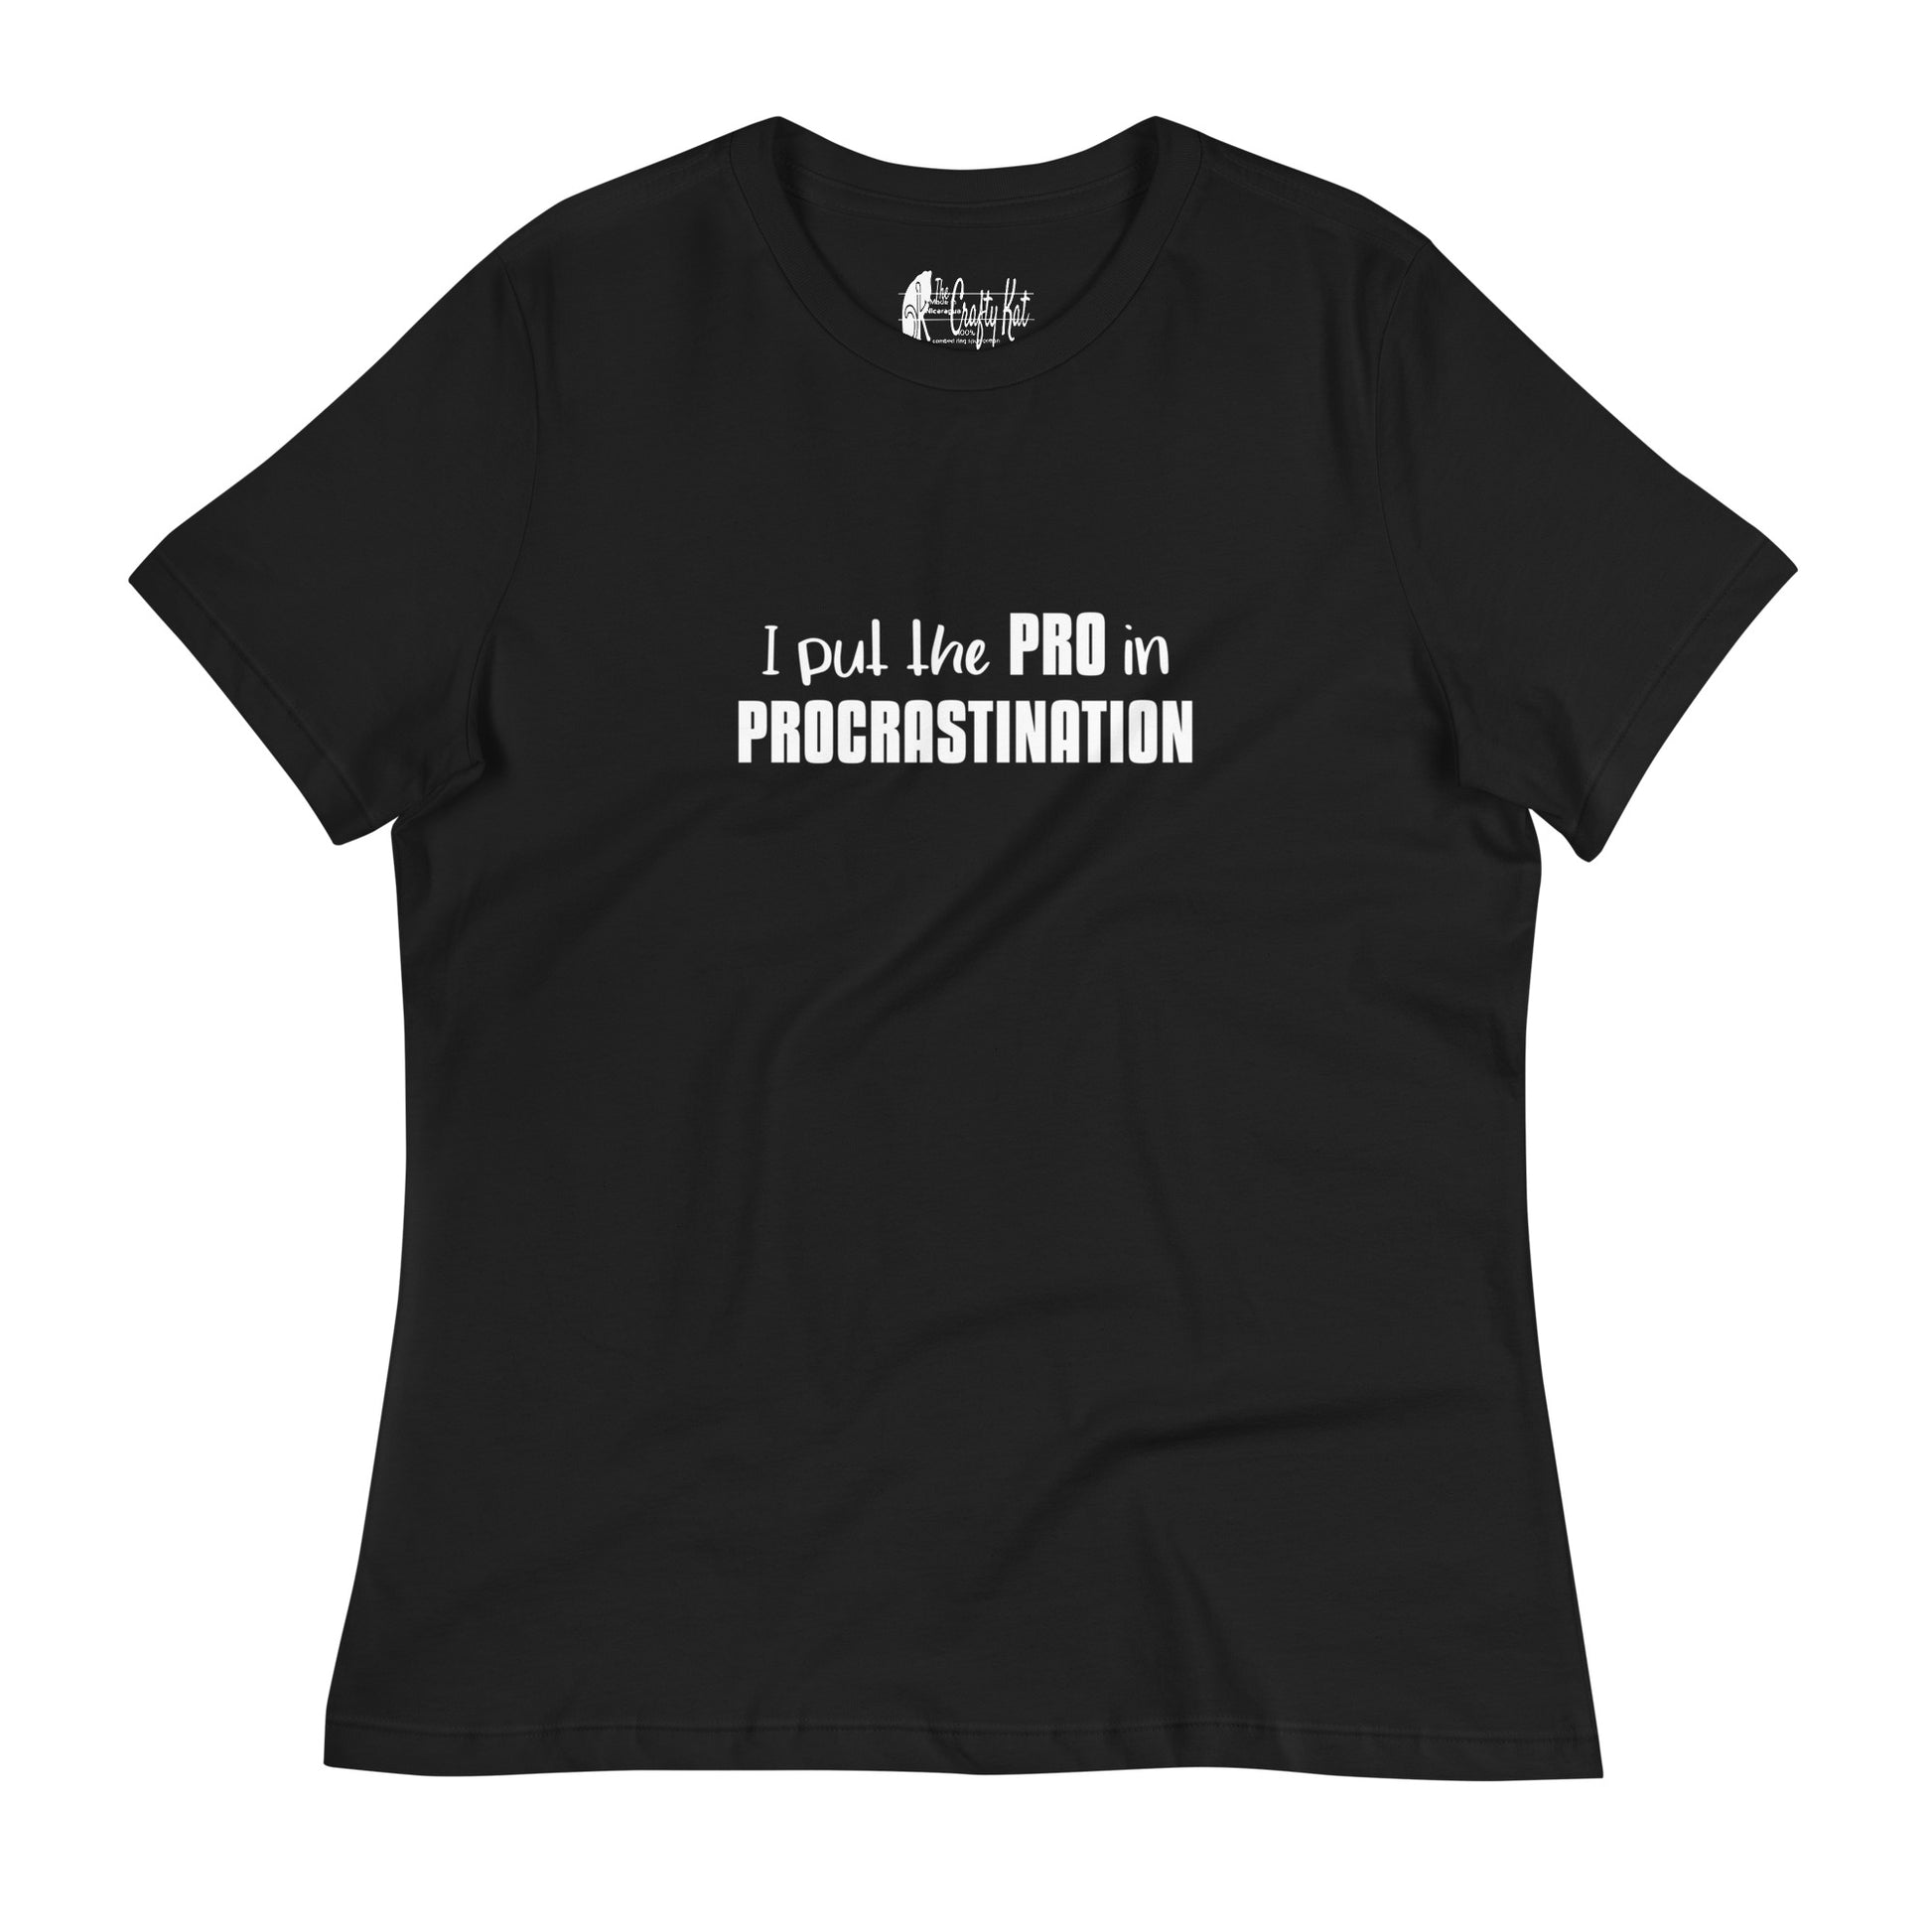 Black women's relaxed t-shirt with text graphic: "I put the PRO in PROCRASTINATION"